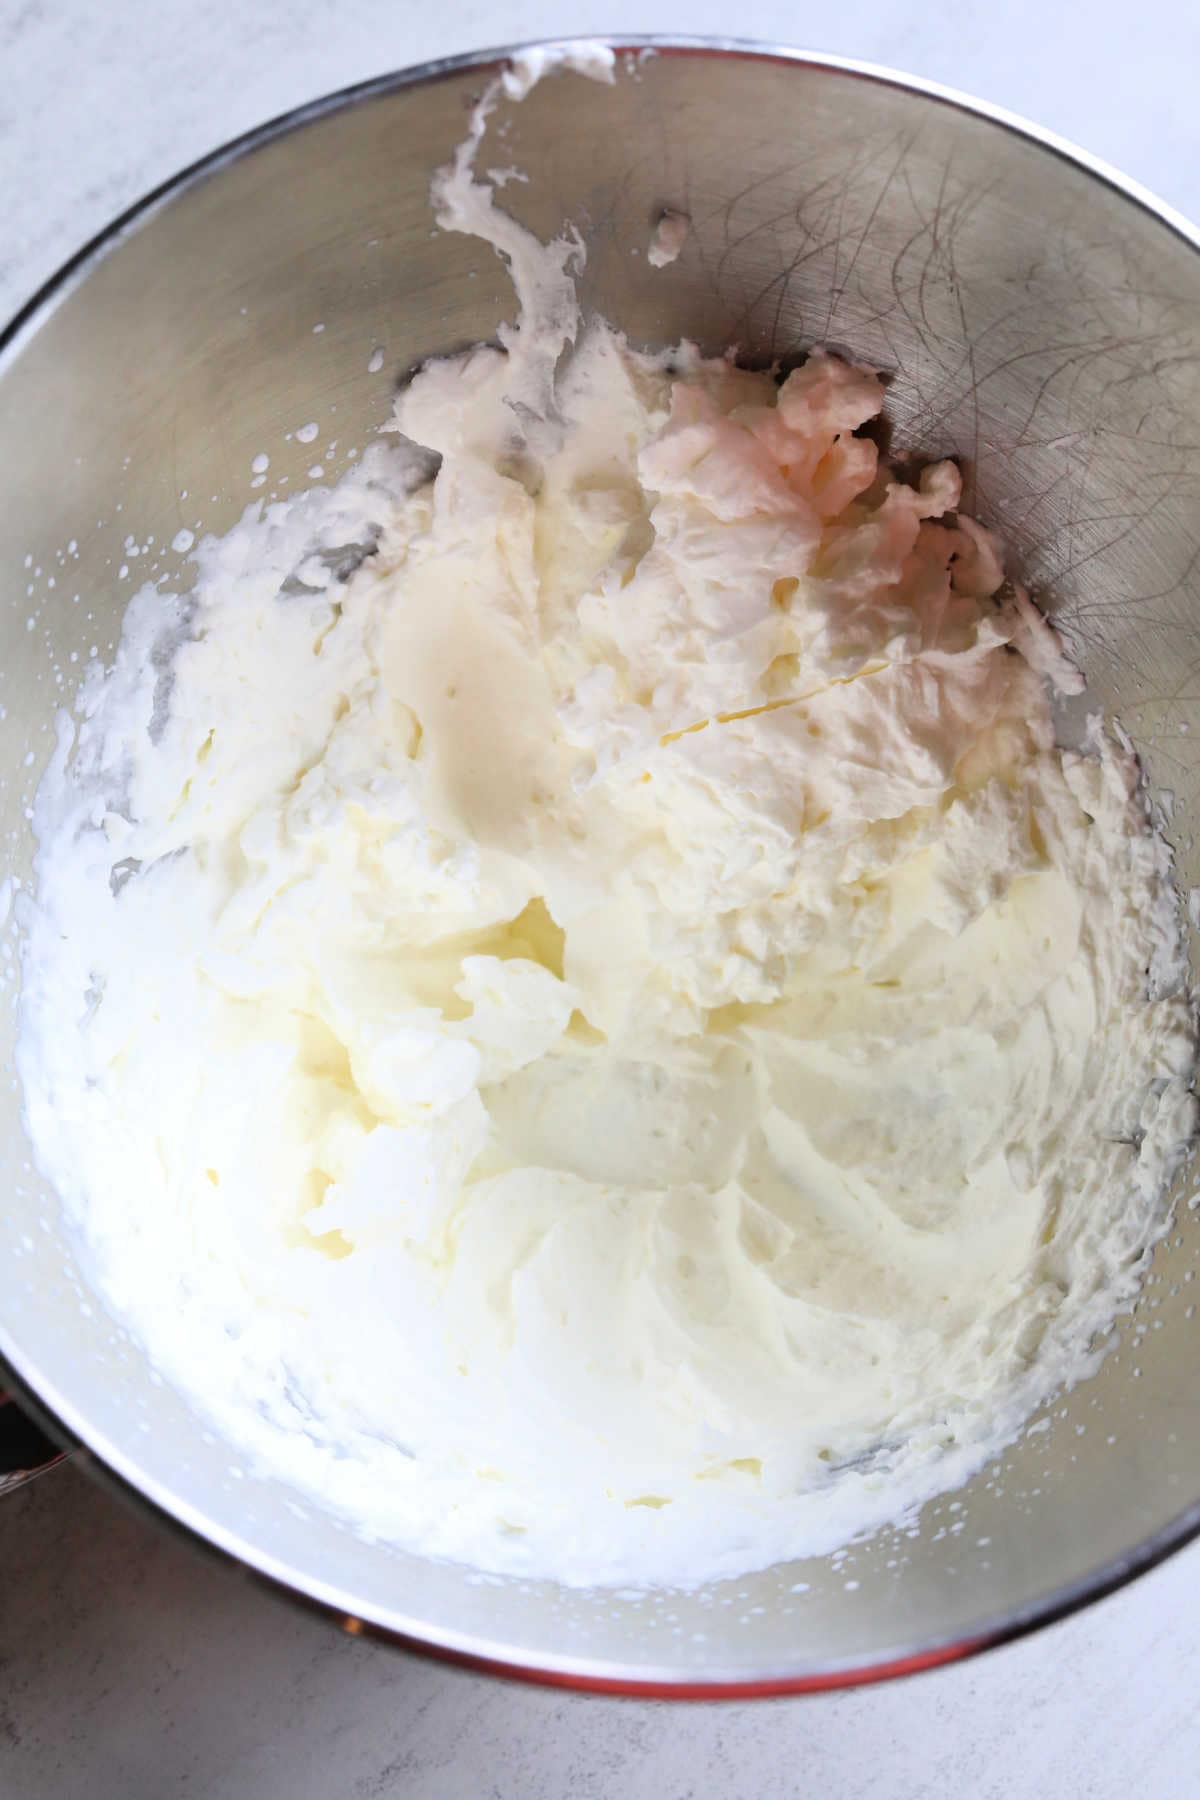 Overview of Sugar-Free Keto Whipped Cream Topping in an Electric Mixer Bowl.